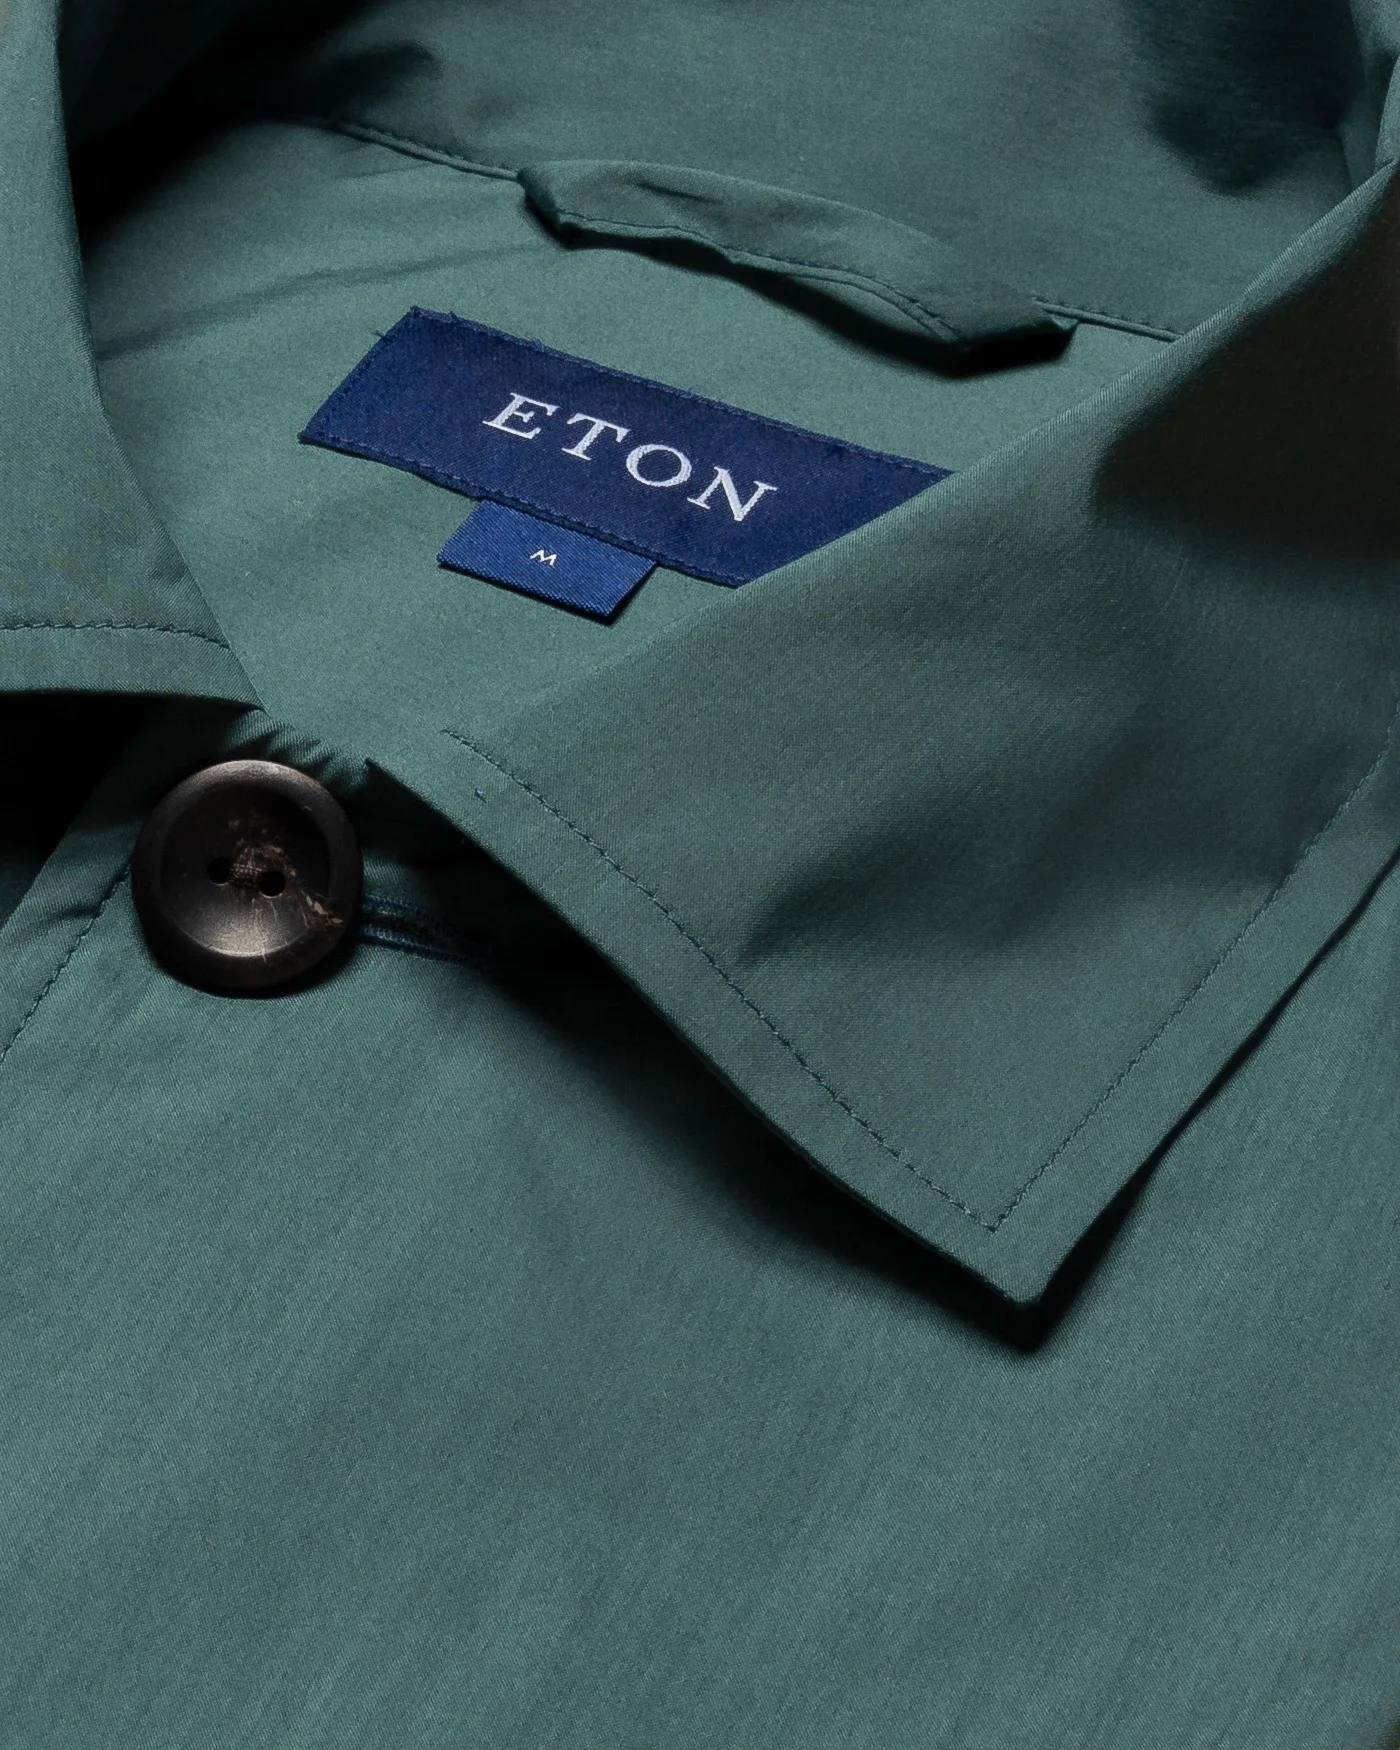 Eton - green wind overshirt collar with no collarstand double round with piping regular